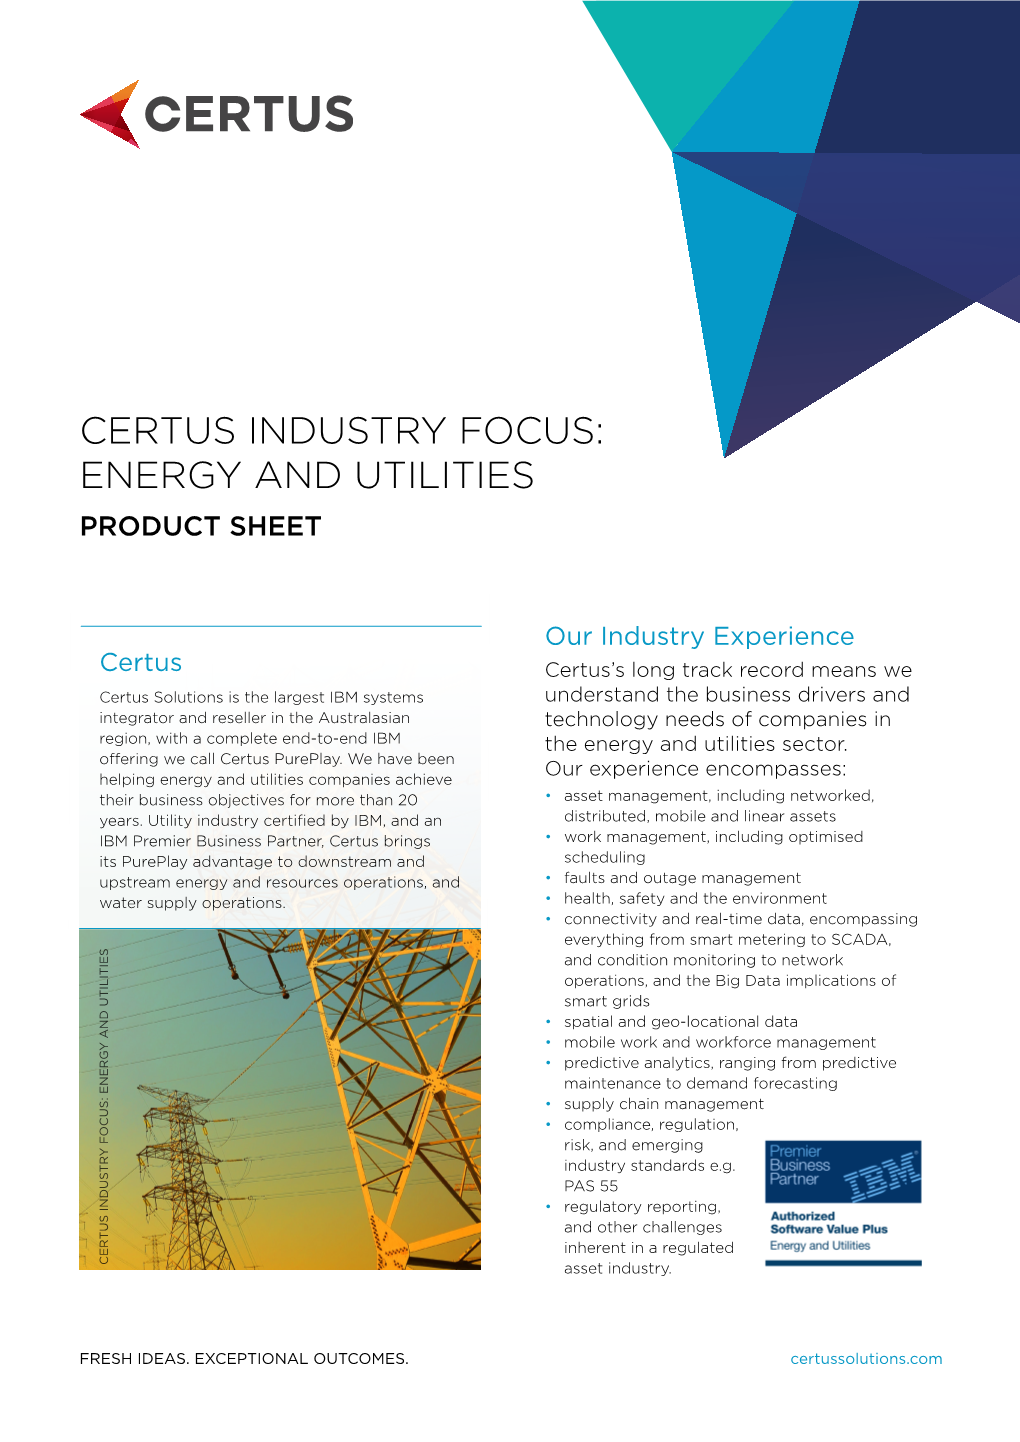 Certus Industry Focus: Energy and Utilities Product Sheet